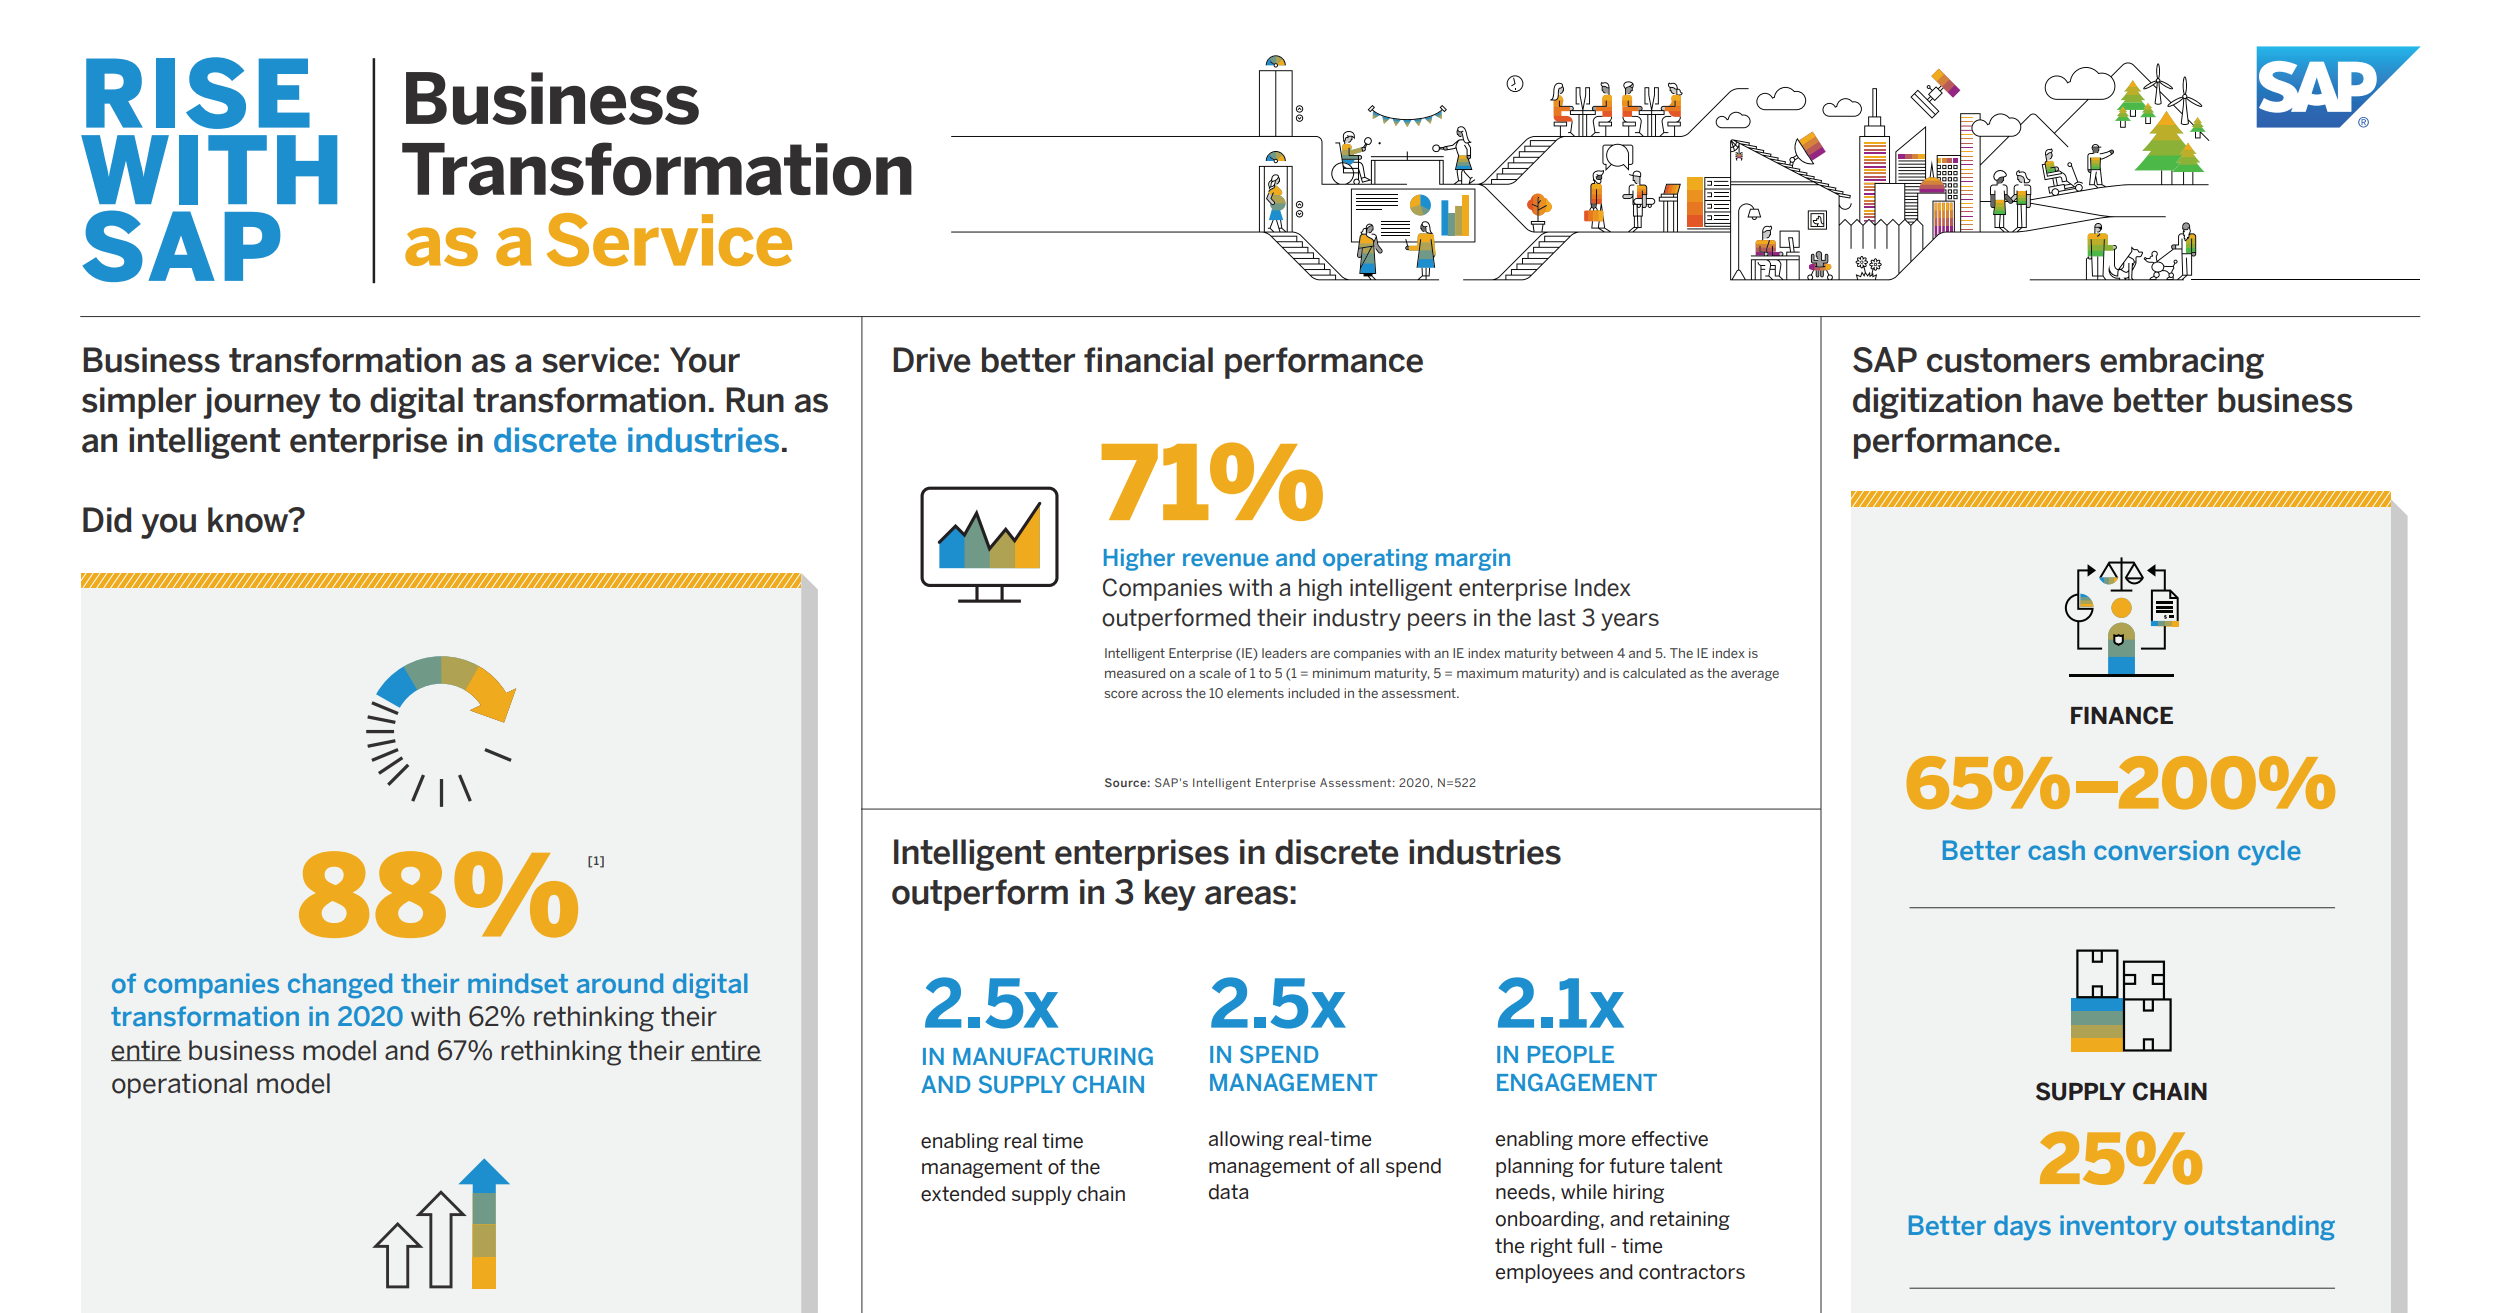 An easier route to digital transformation with RISE with SAP